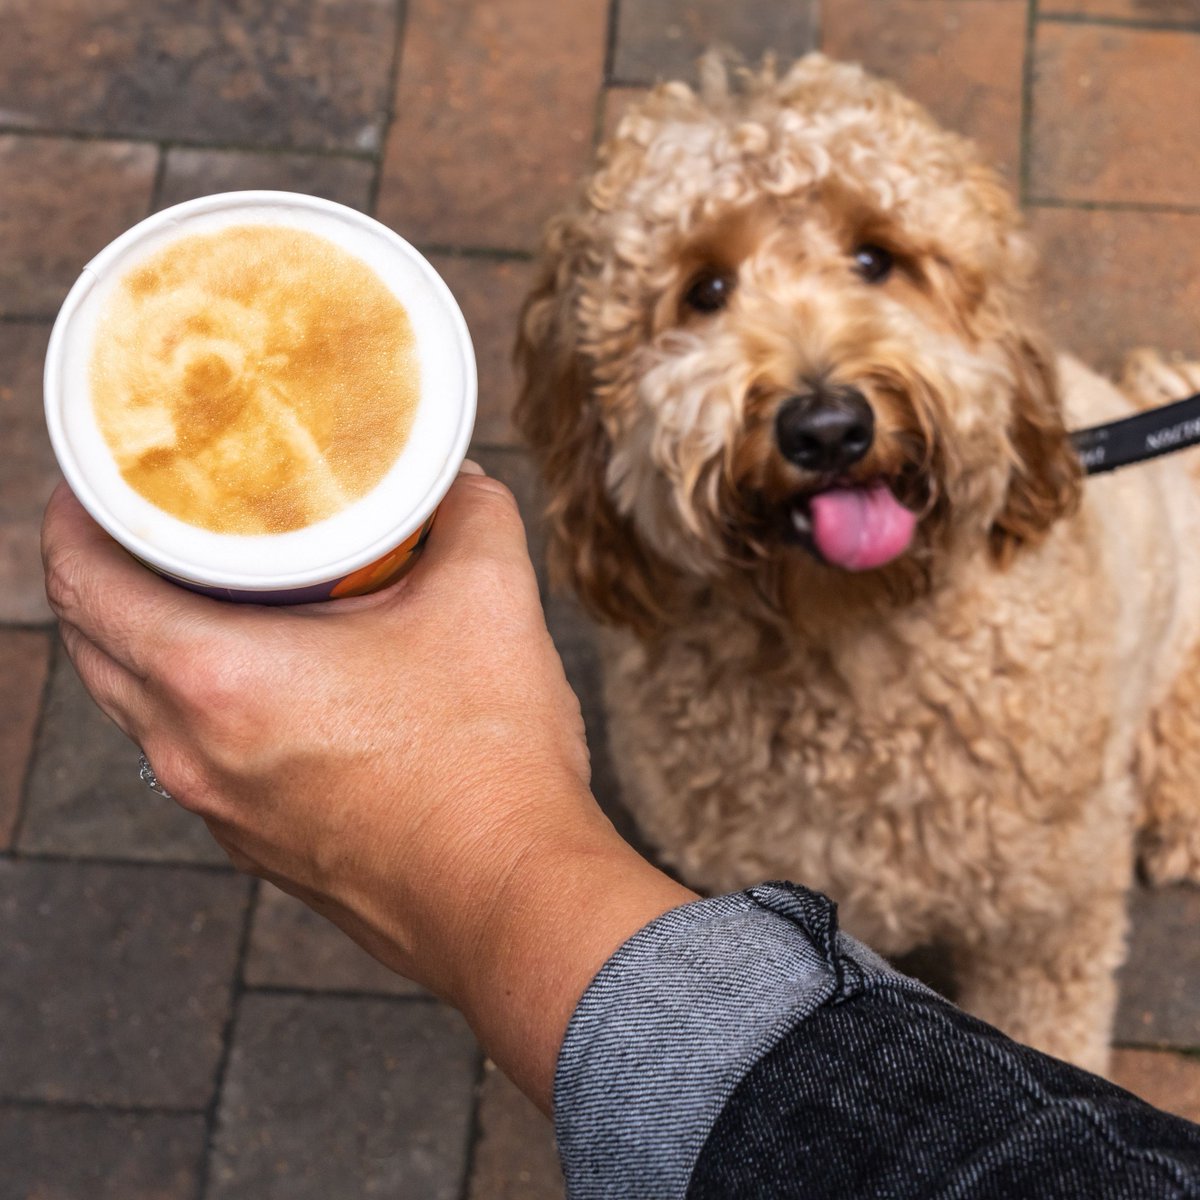 It's never a 'ruff' visit when your favorite travel companion is with you. Tap the link in our bio to treat your pup during your stay. #NationalPetMonth #PetFriendly